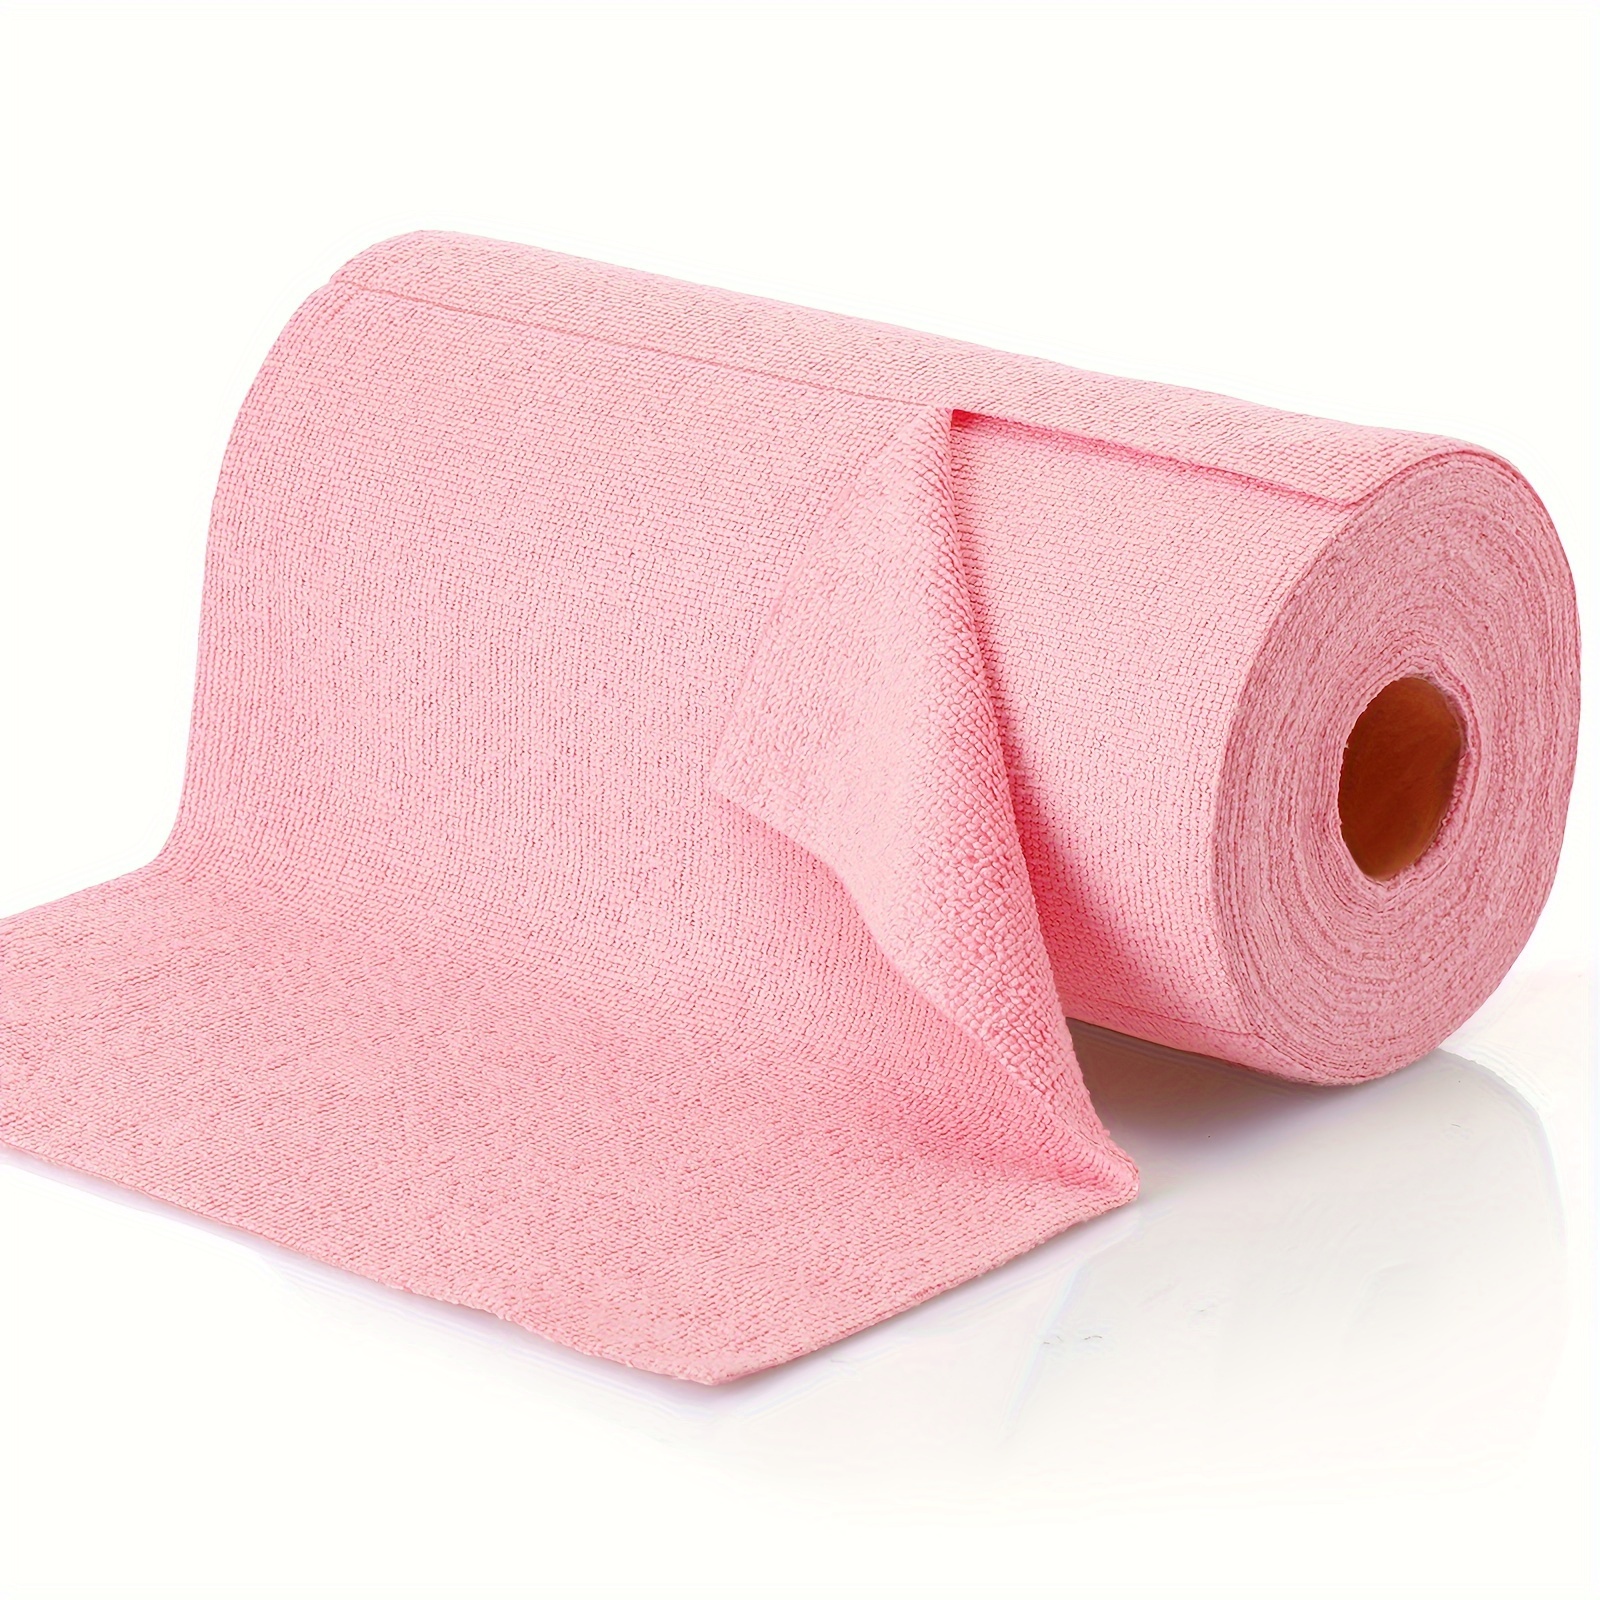 

Reusable Microfiber Cleaning Cloths Roll Washable Tear Away Microfiber Towels For Cars 12" X 12" Cleaning Wipe Rags For Home House Kitchen Garage All Purpose (pink, 1 Roll)